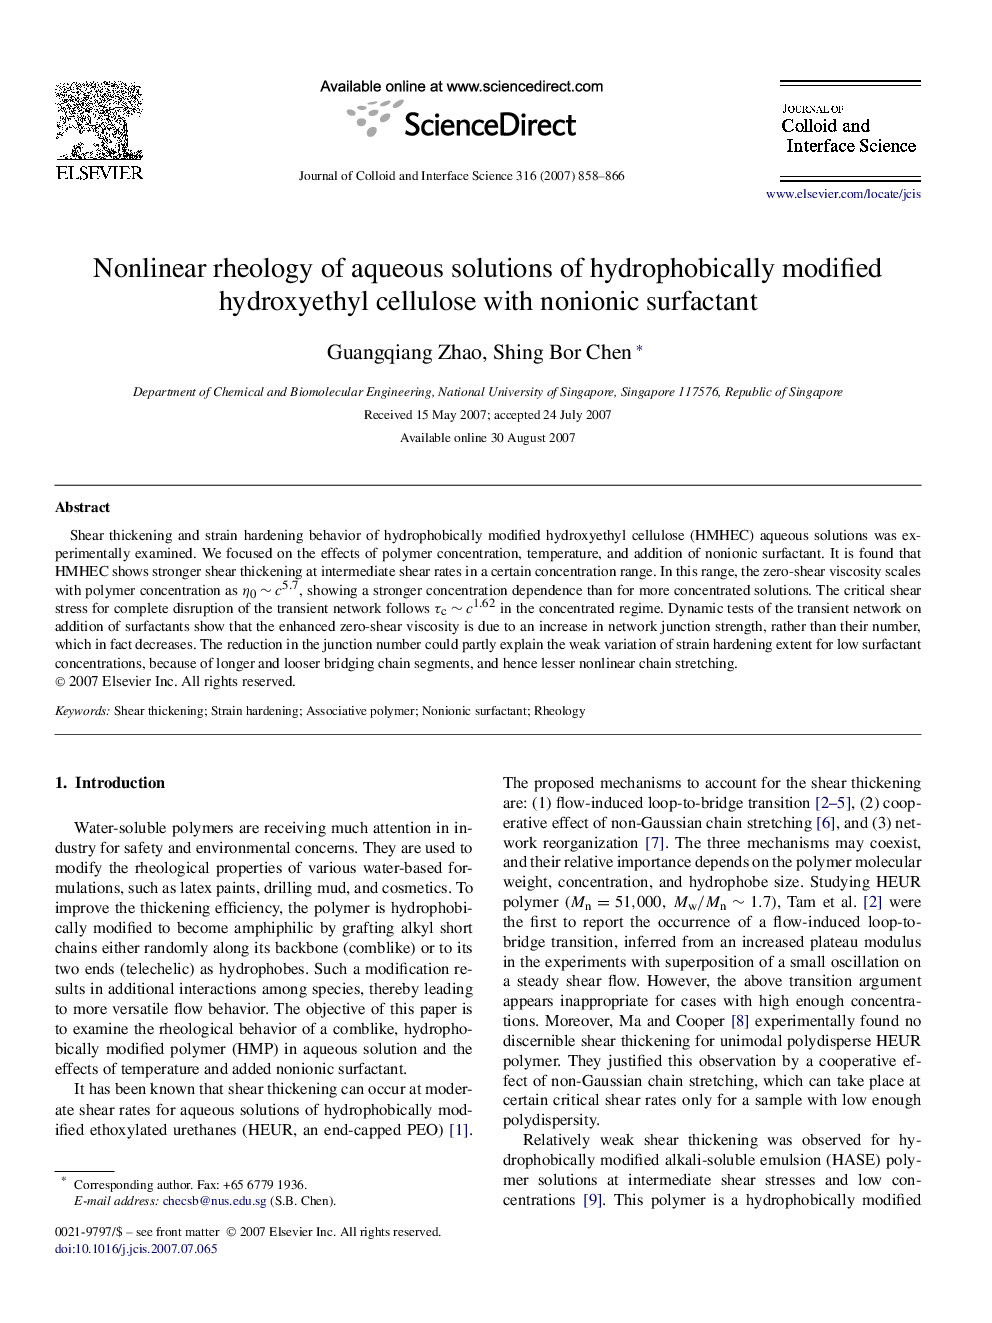 Nonlinear rheology of aqueous solutions of hydrophobically modified hydroxyethyl cellulose with nonionic surfactant